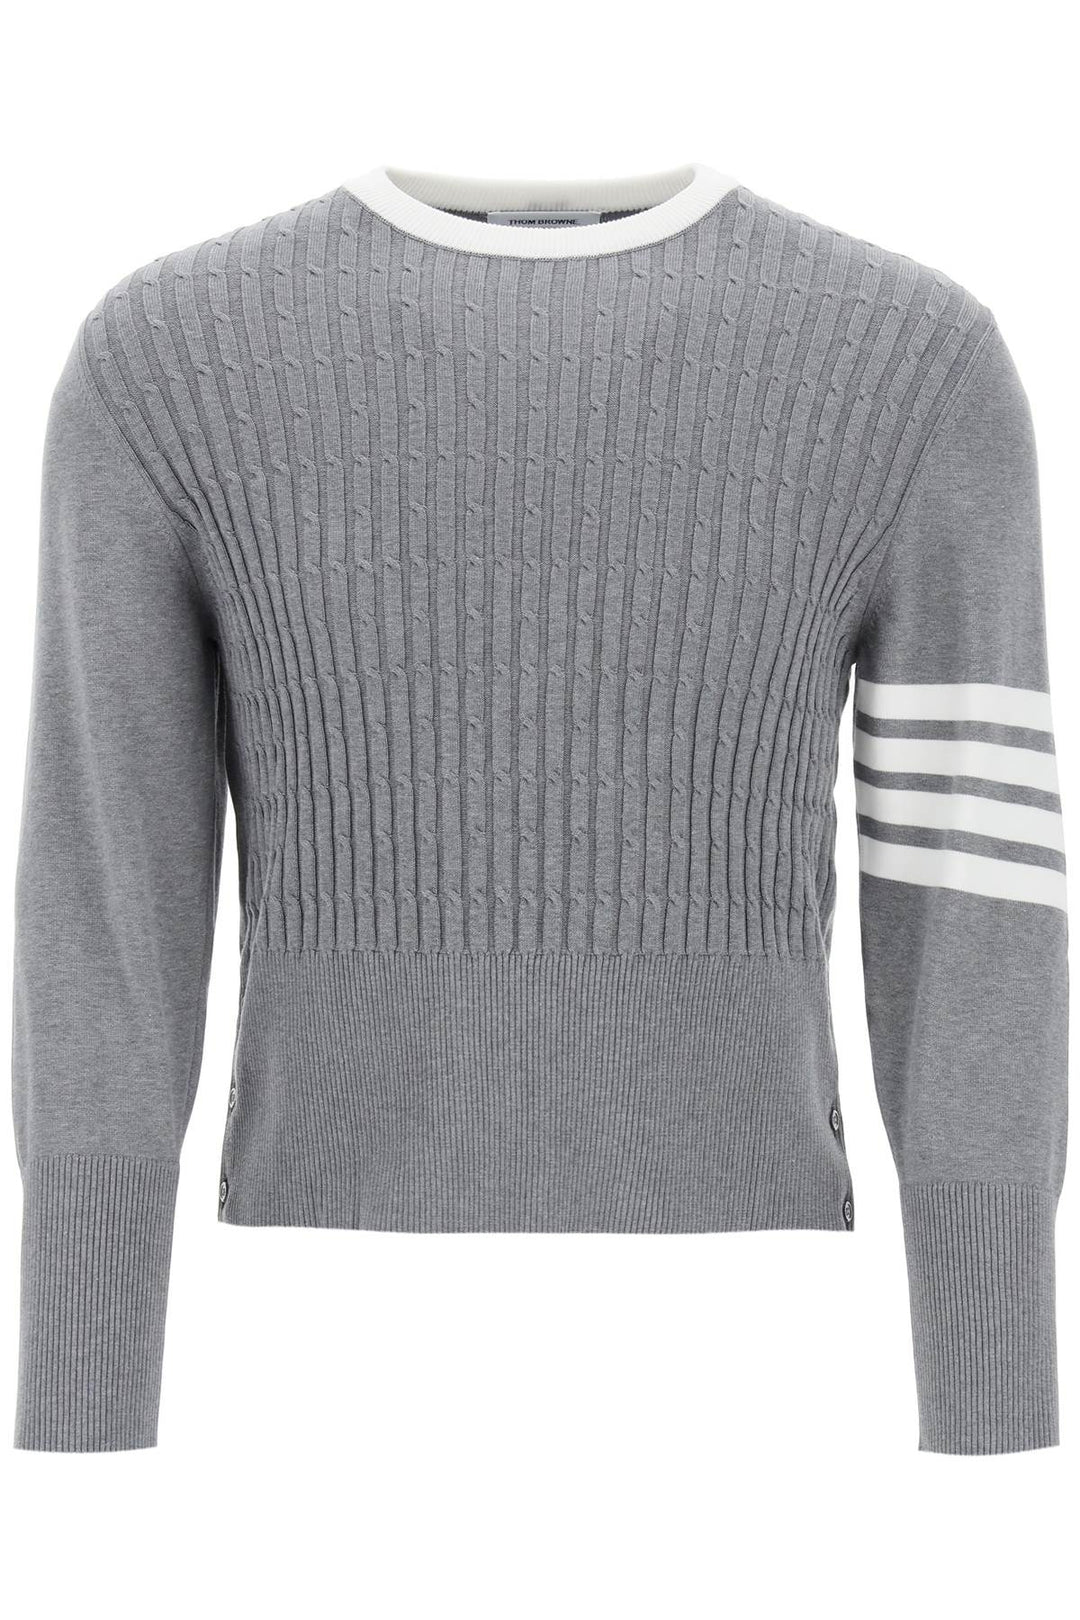 Thom browne placed baby cable 4-bar cotton sweater-0